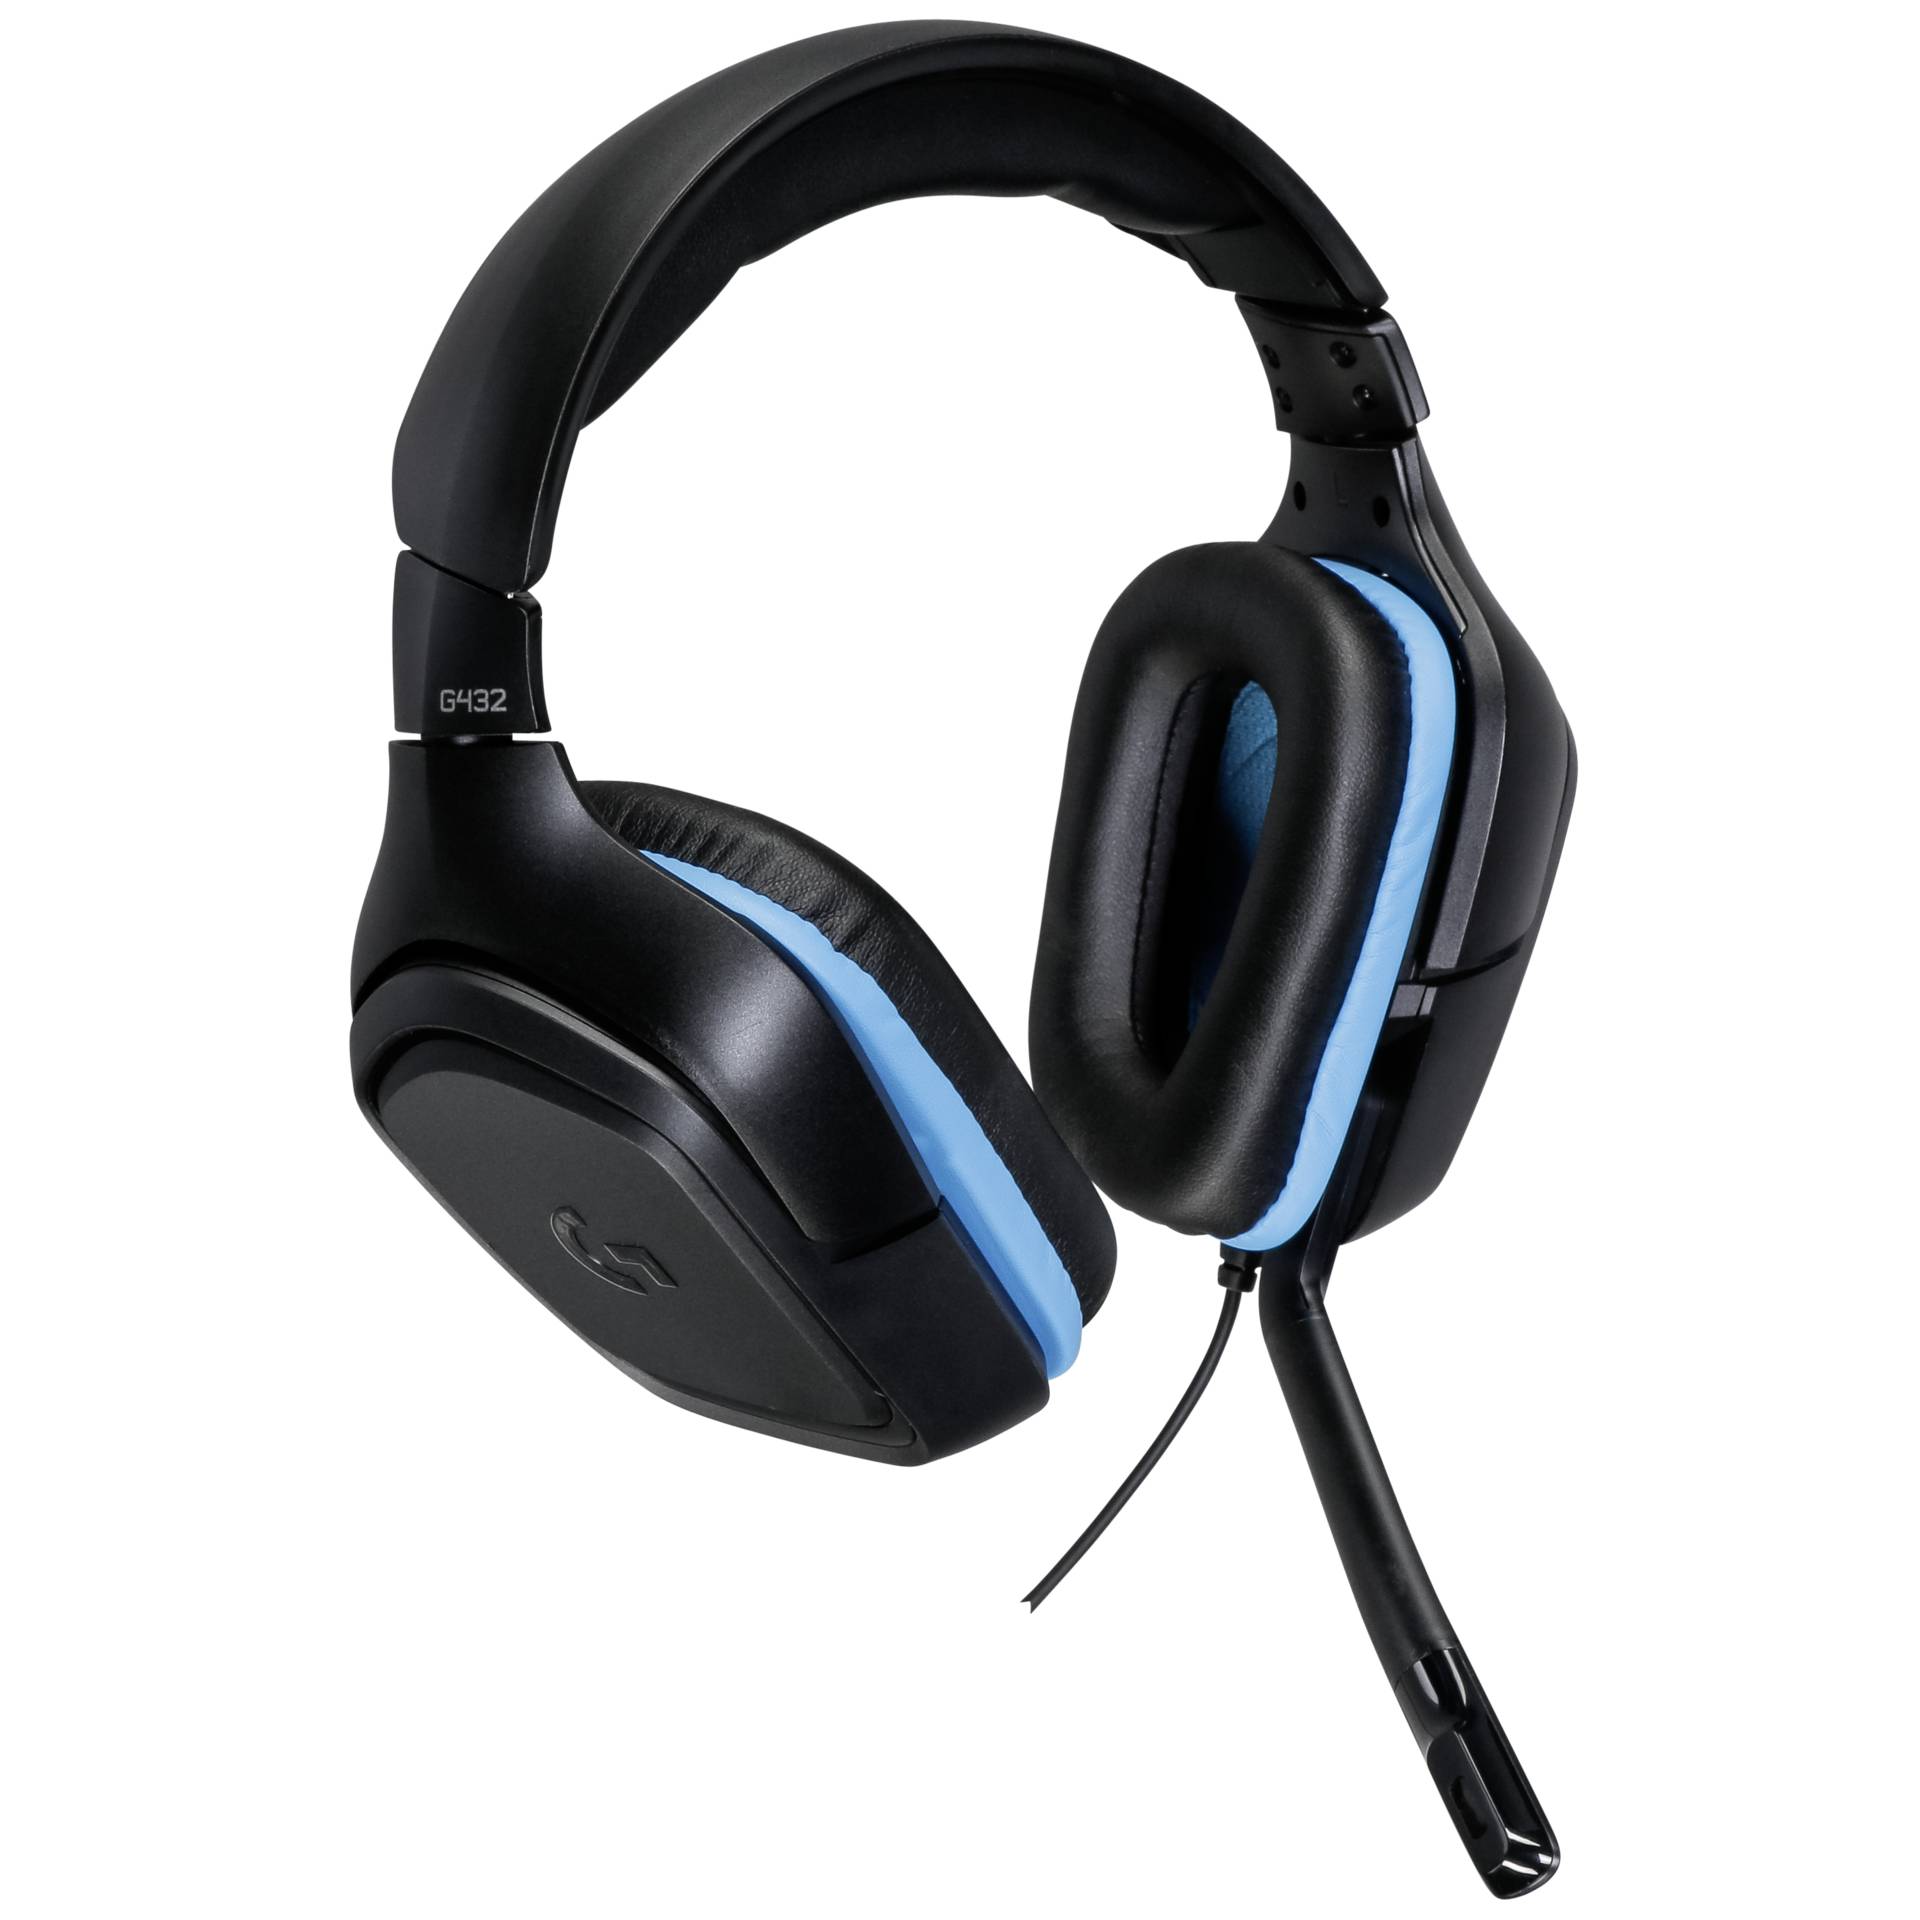 Logitech G432 7.1 Surround USB, Gaming Headset , Over-Ear, PC, PS4, Xbox One, Nintendo Switch